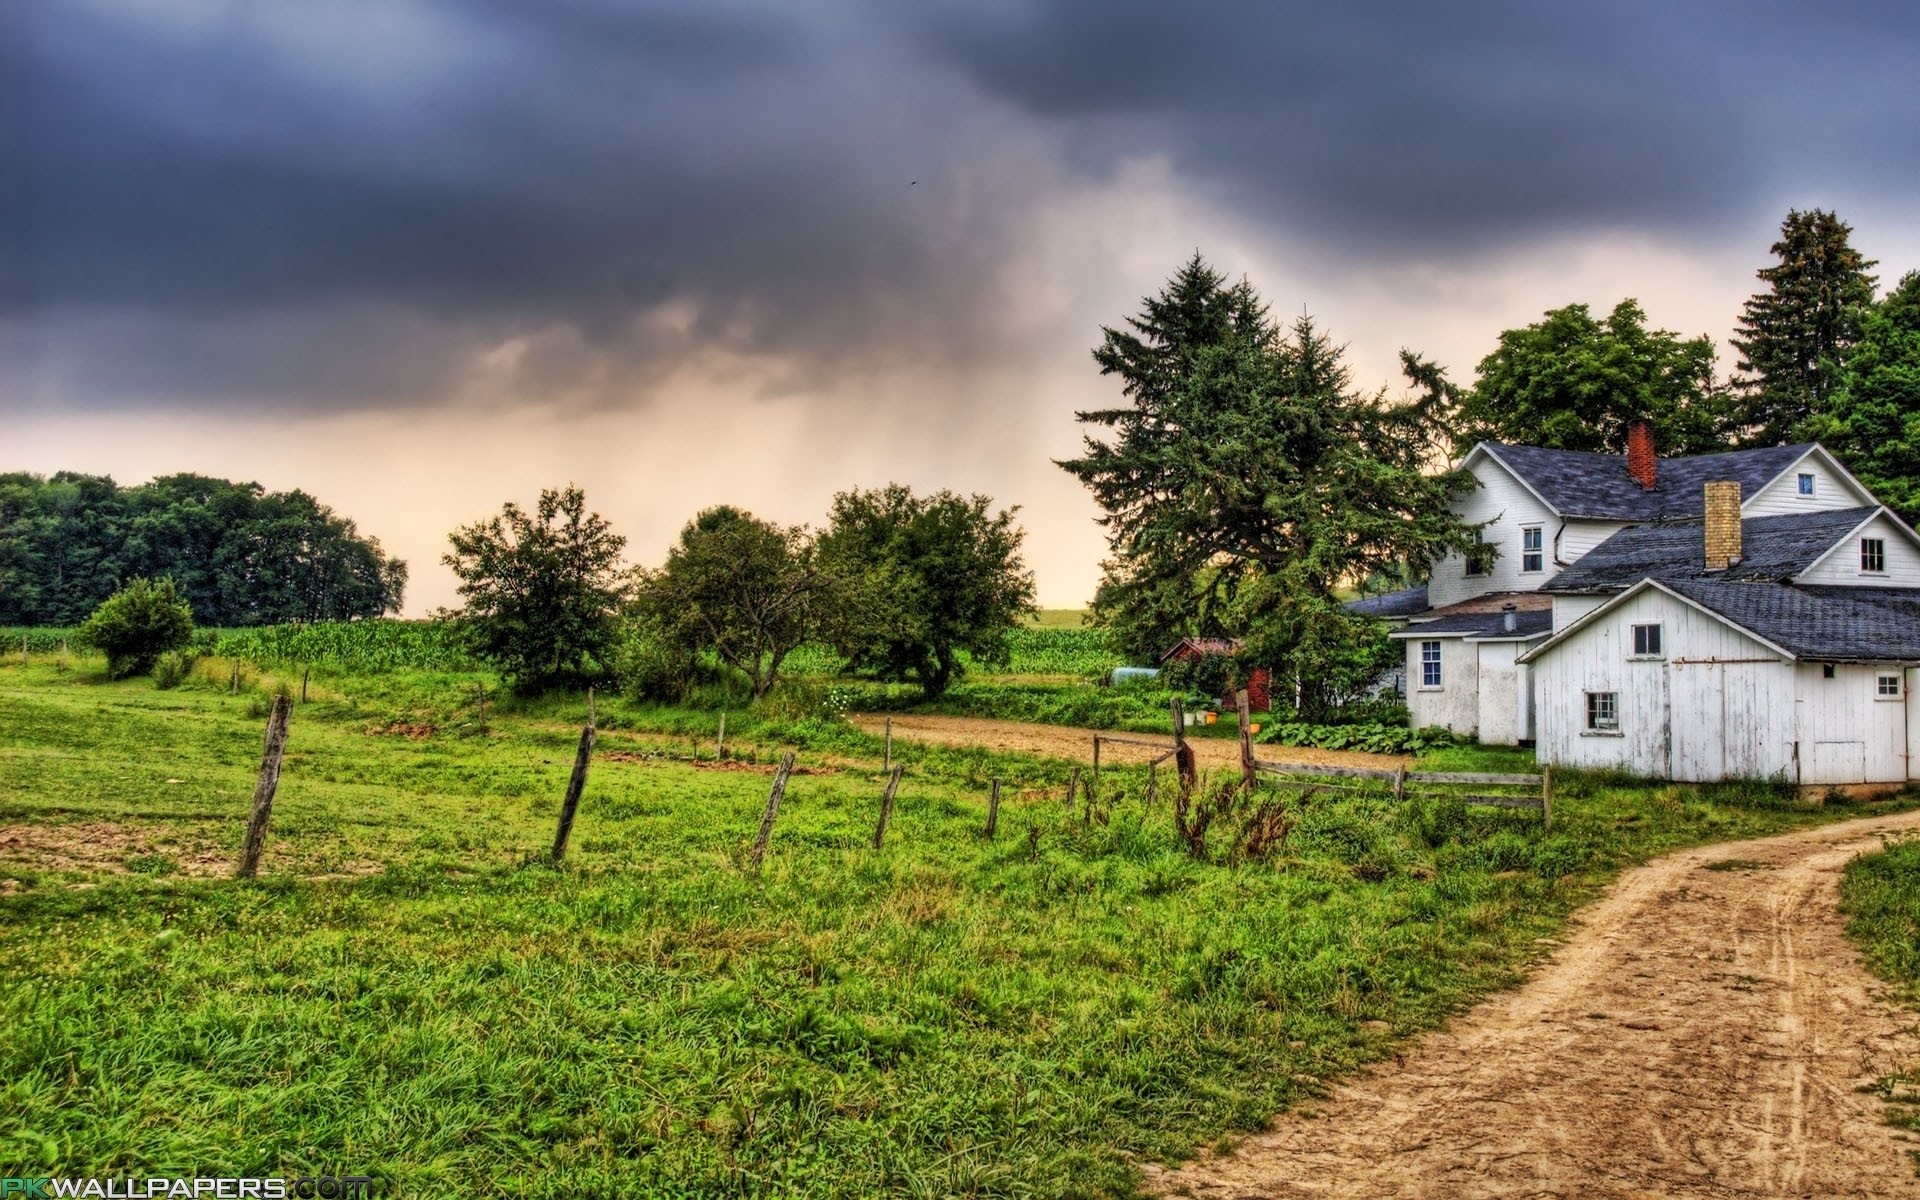 Country home under stormy sky wallpaper | AllWallpaper.in #16551 ...